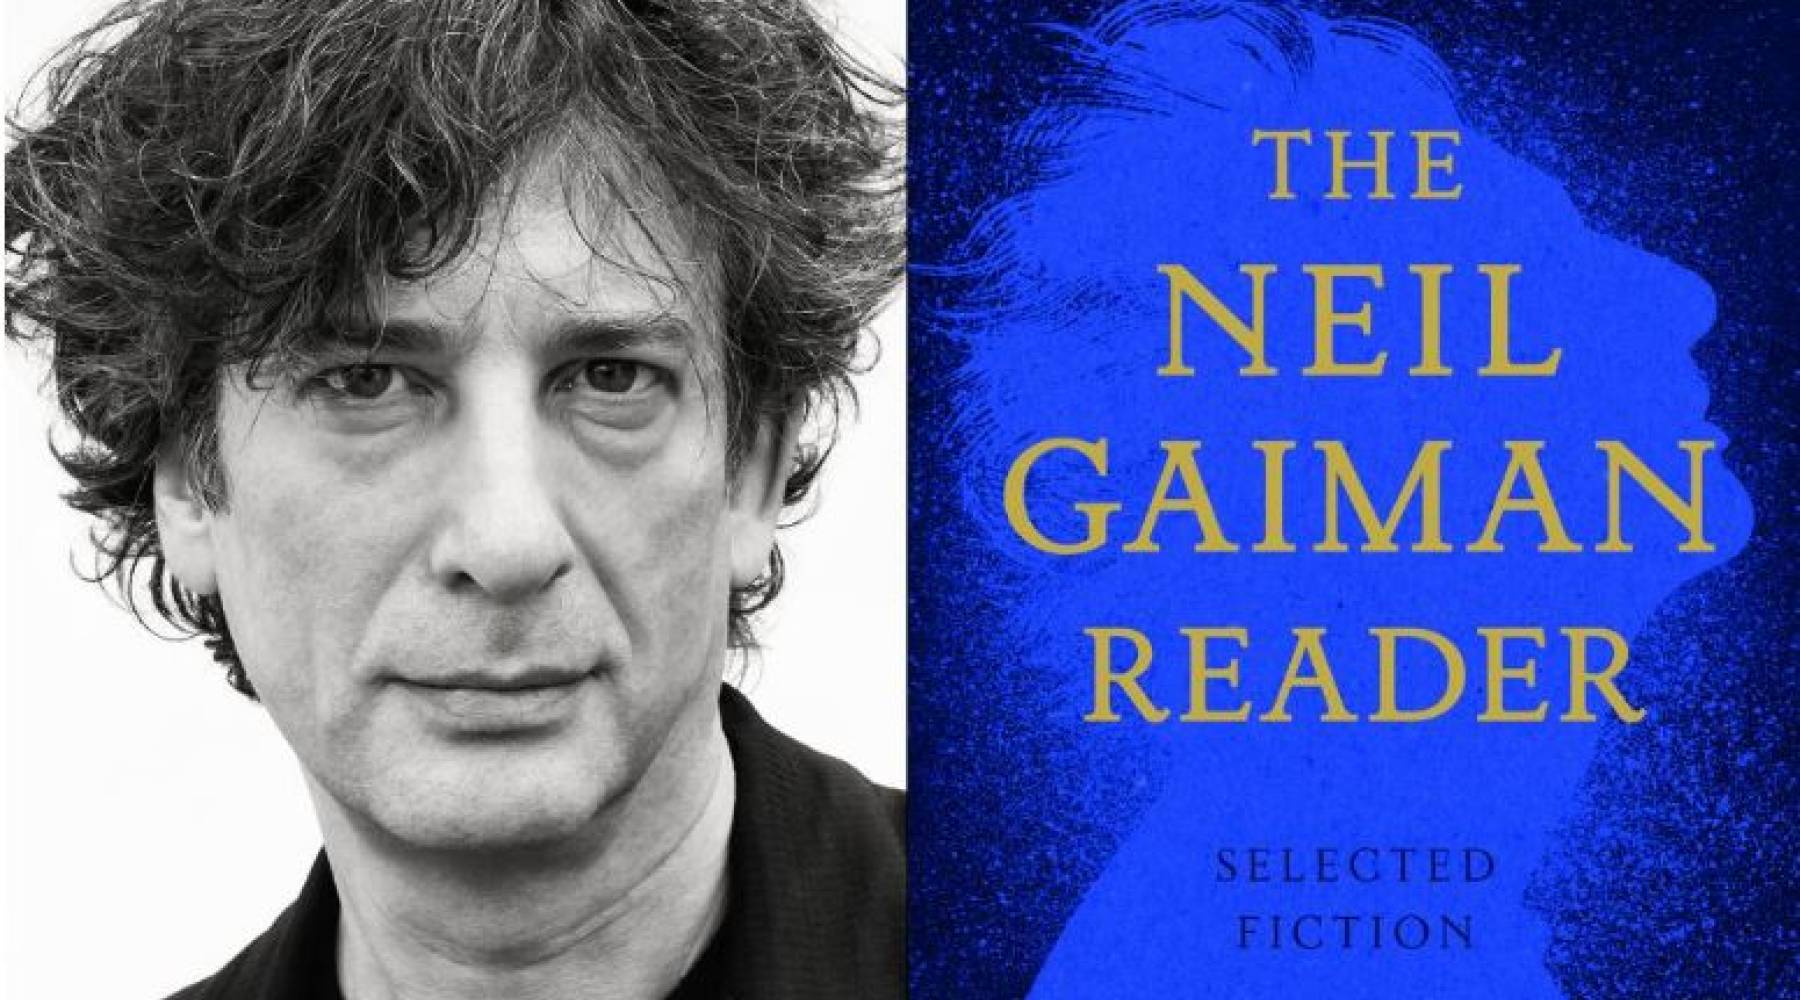 Archived: The Universe of Story: Neil Gaiman